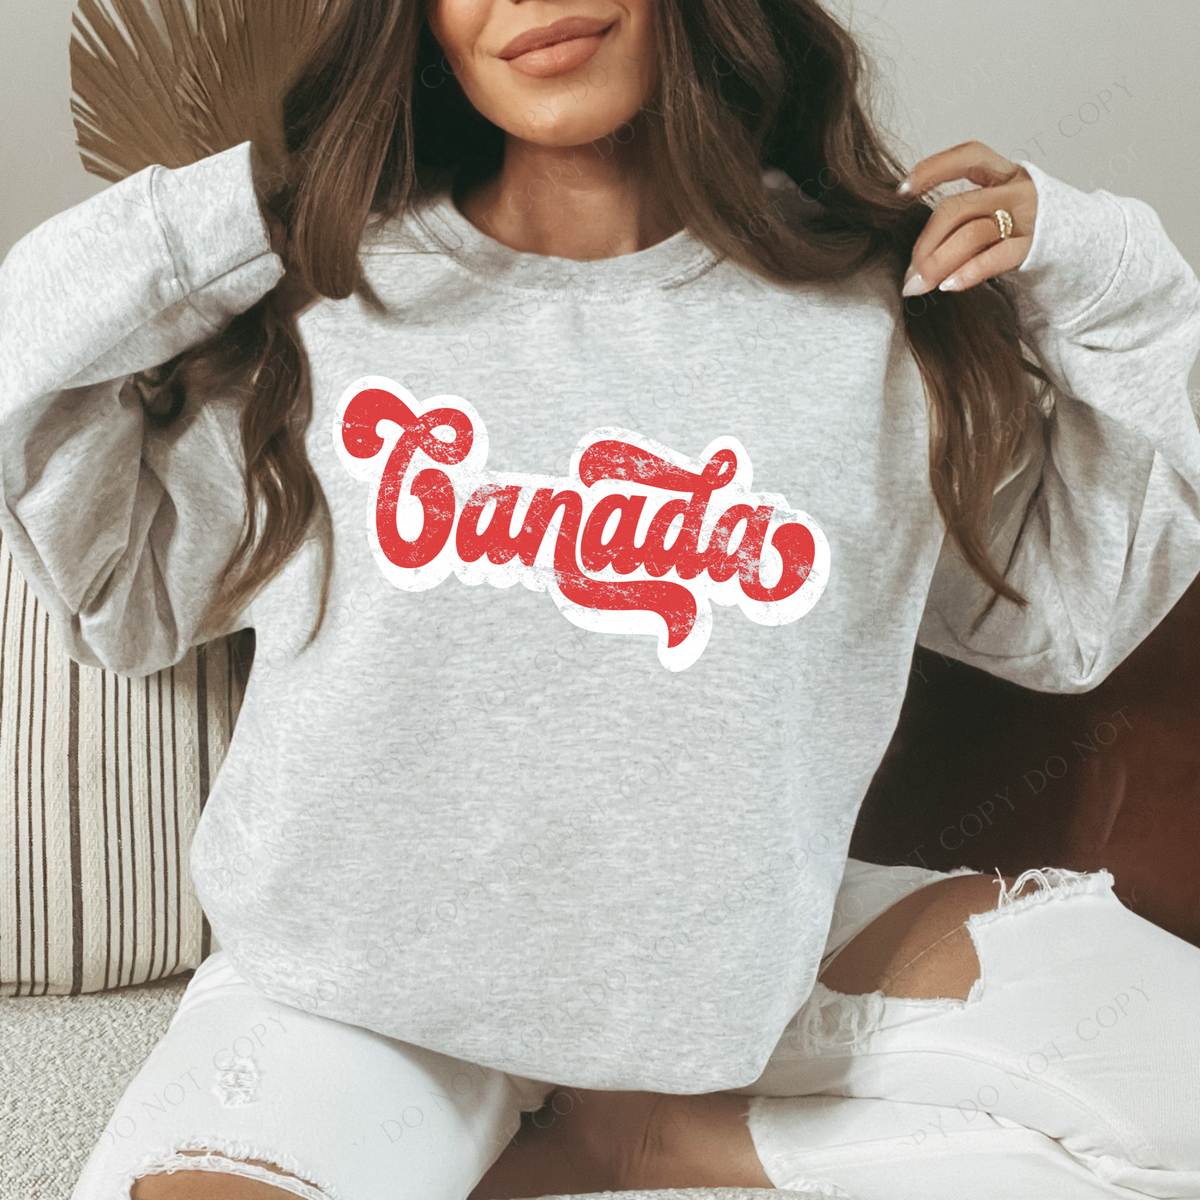 Canada Red & White Retro Shadow Distressed Digital Design, PNG